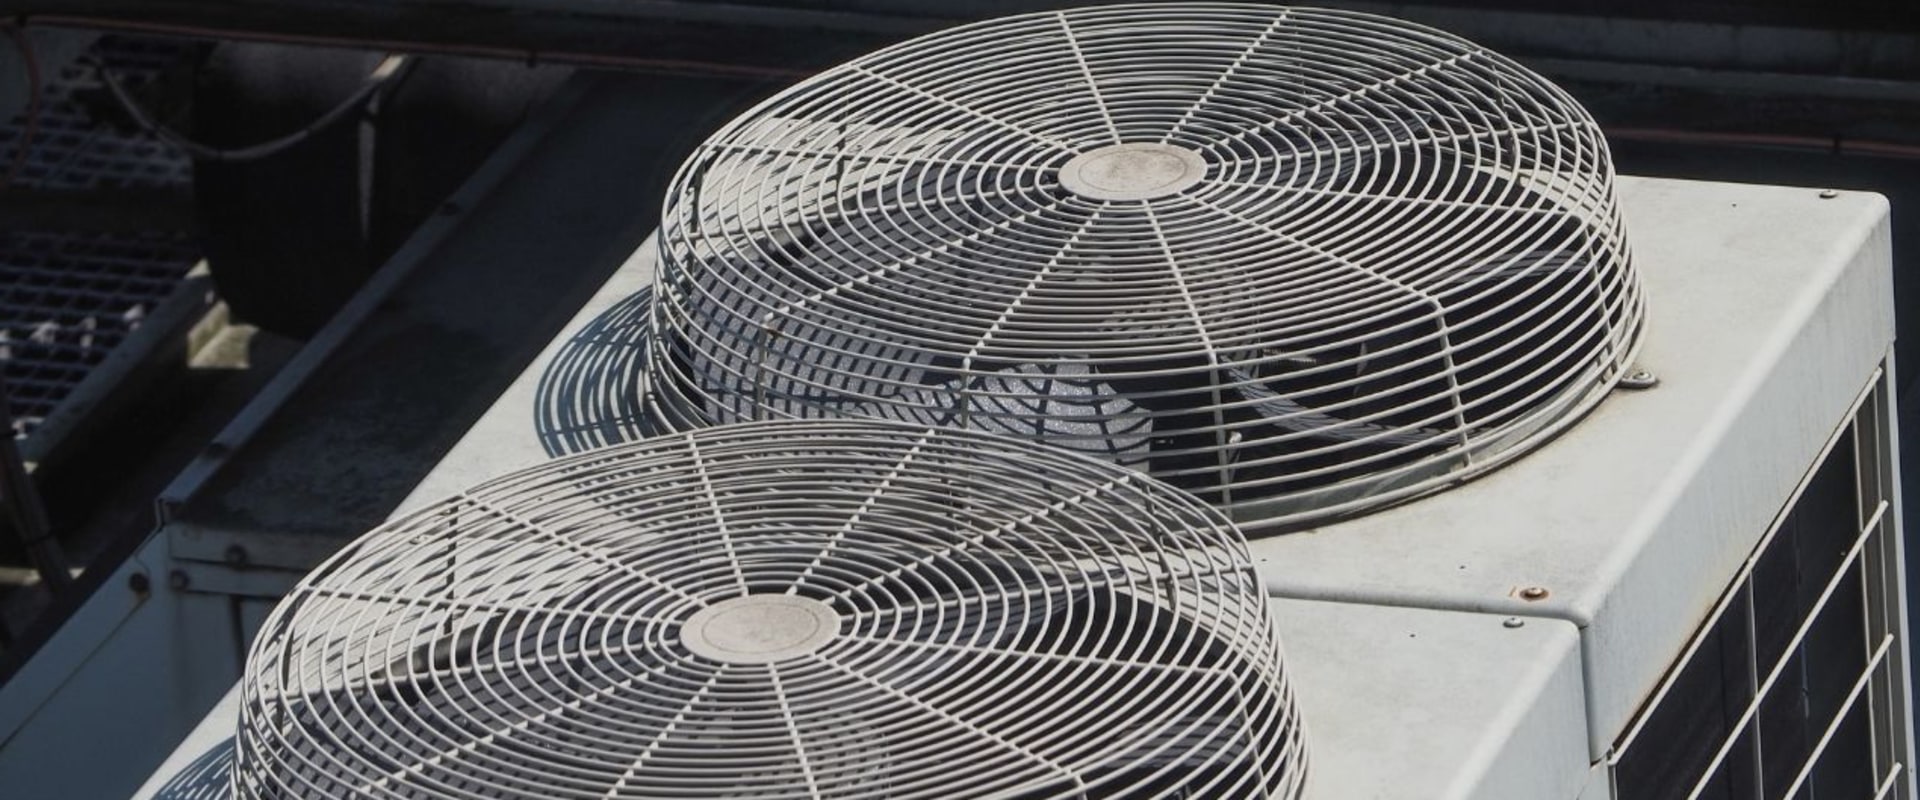 What are the most common types of hvac systems?